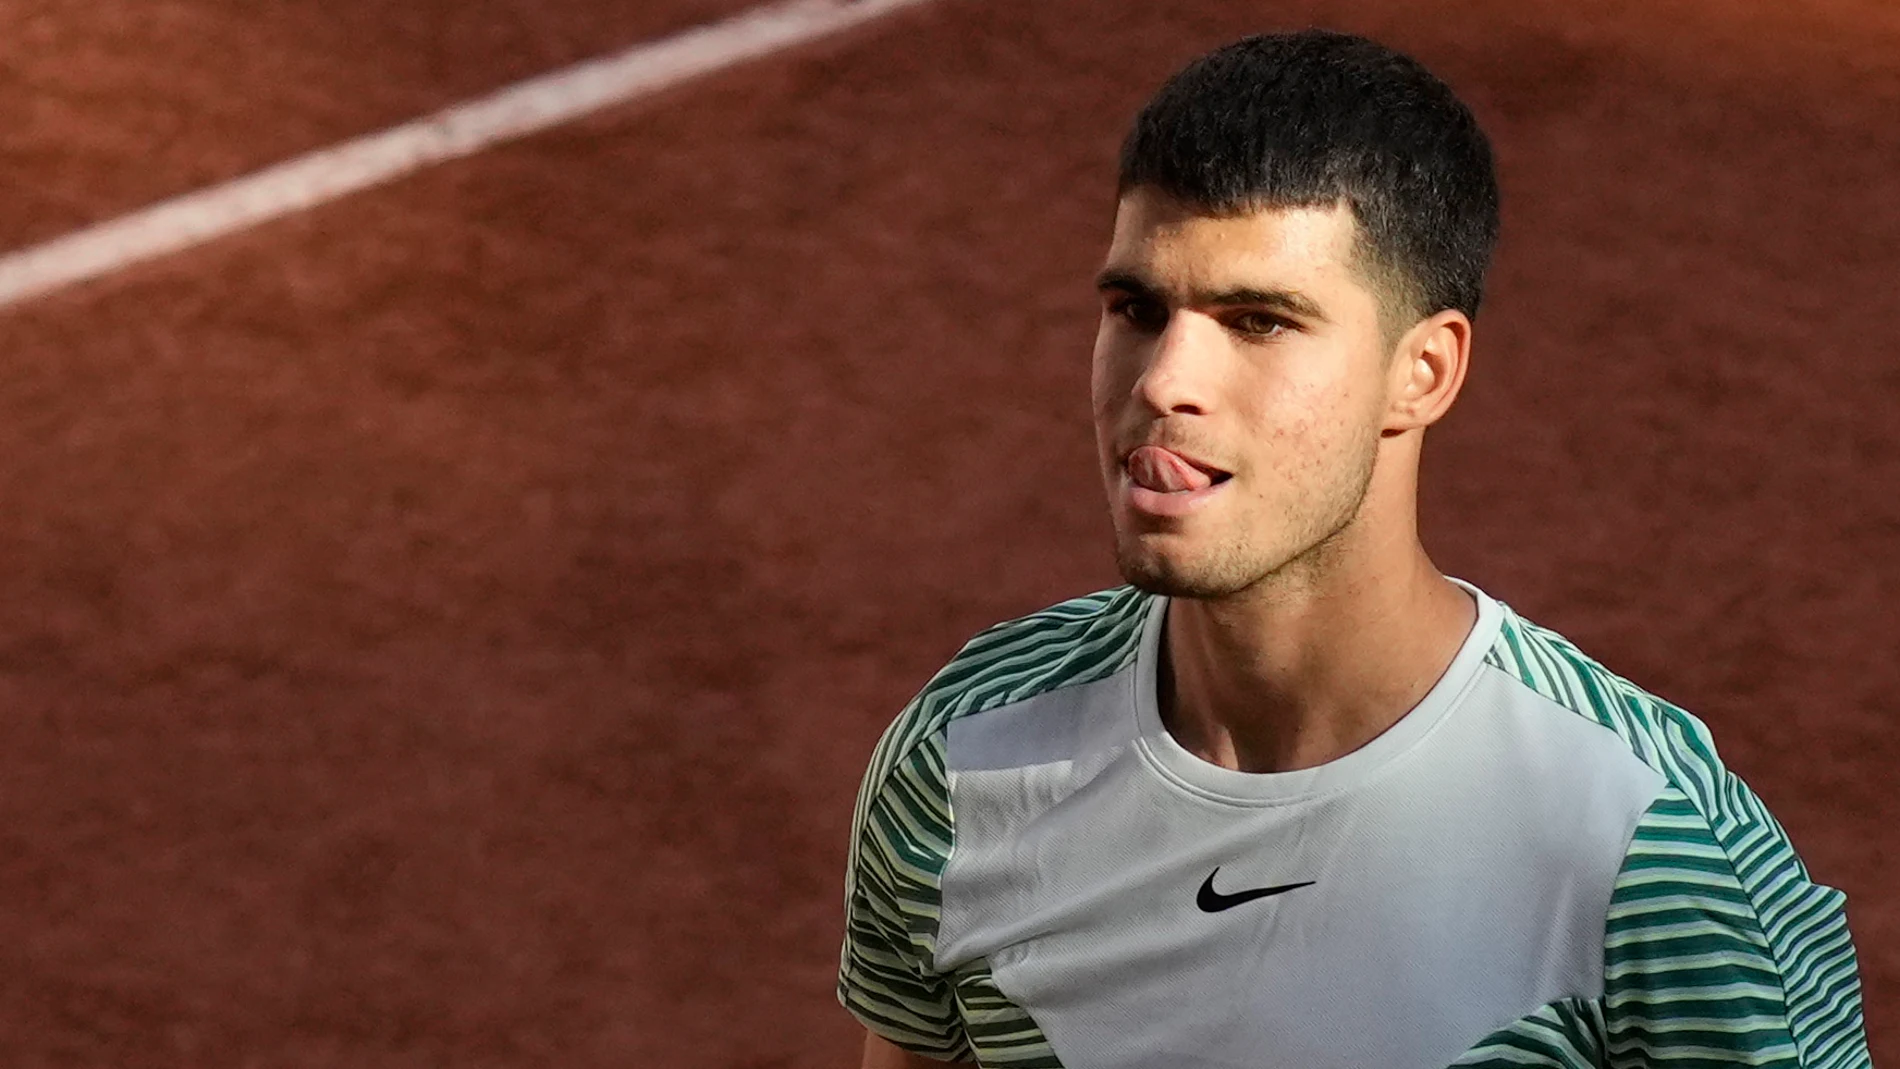 Spain's Carlos Alcaraz reacts after winning his second round match of the French Open tennis tournament against Japan's Taro Daniel, at the Roland Garros stadium in Paris, Wednesday, May 31, 2023. (AP Photo/Thibault Camus)